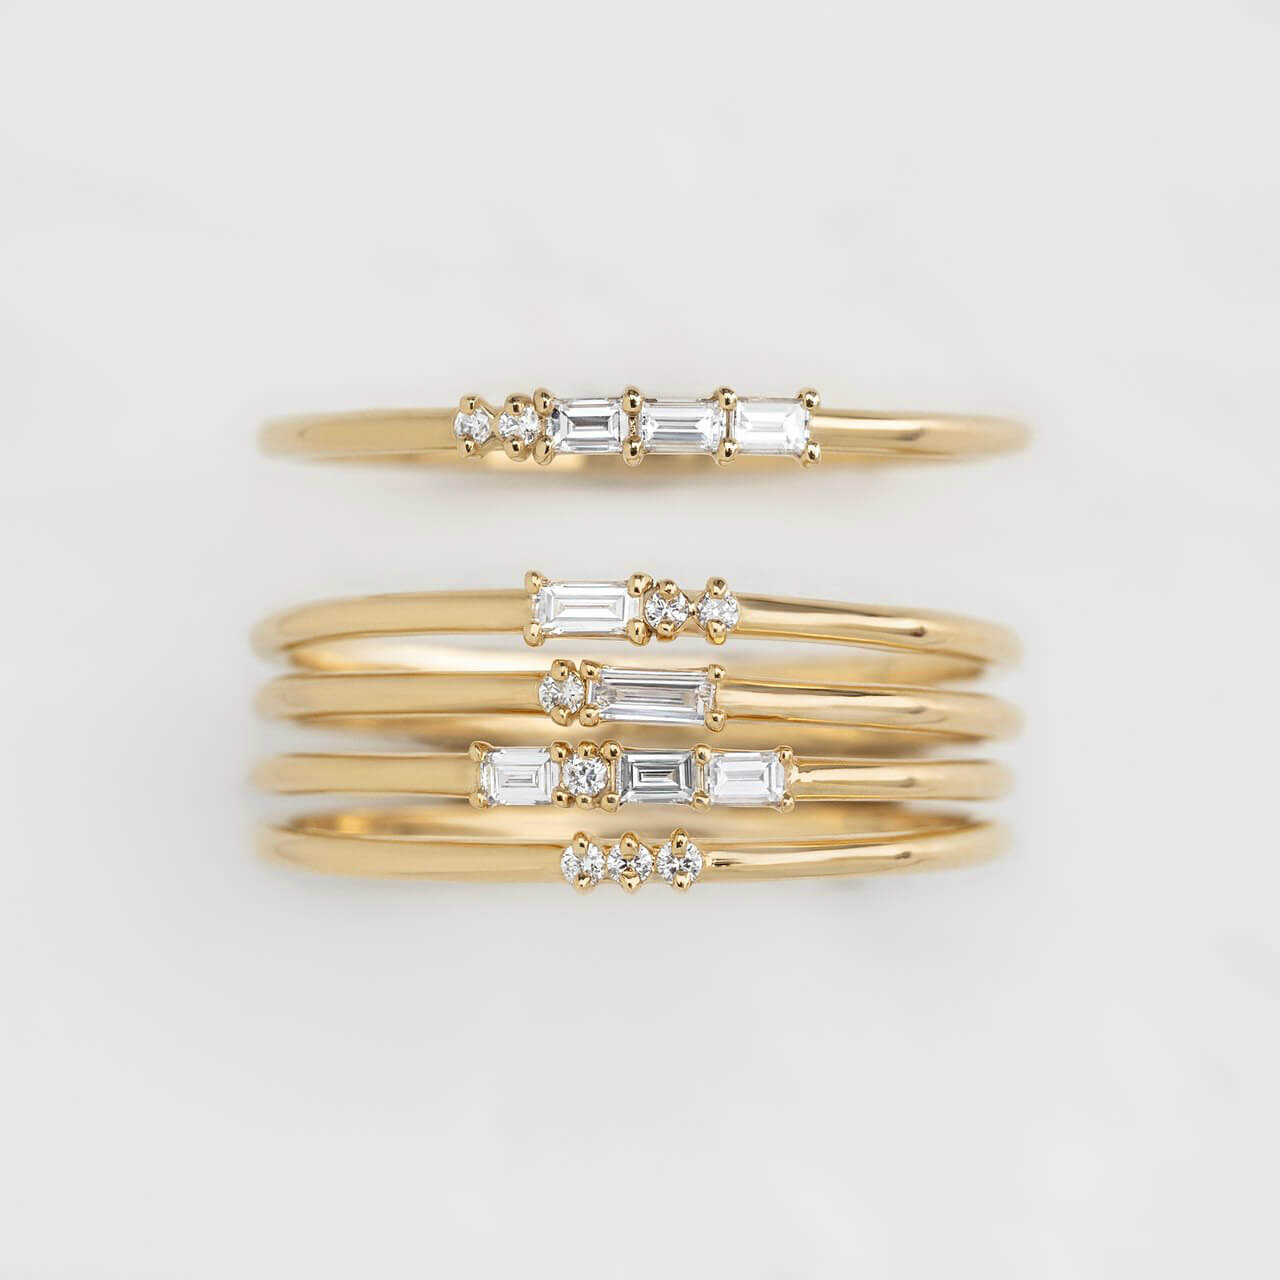 Morse Code Ring, Yellow Gold - Letter "M"